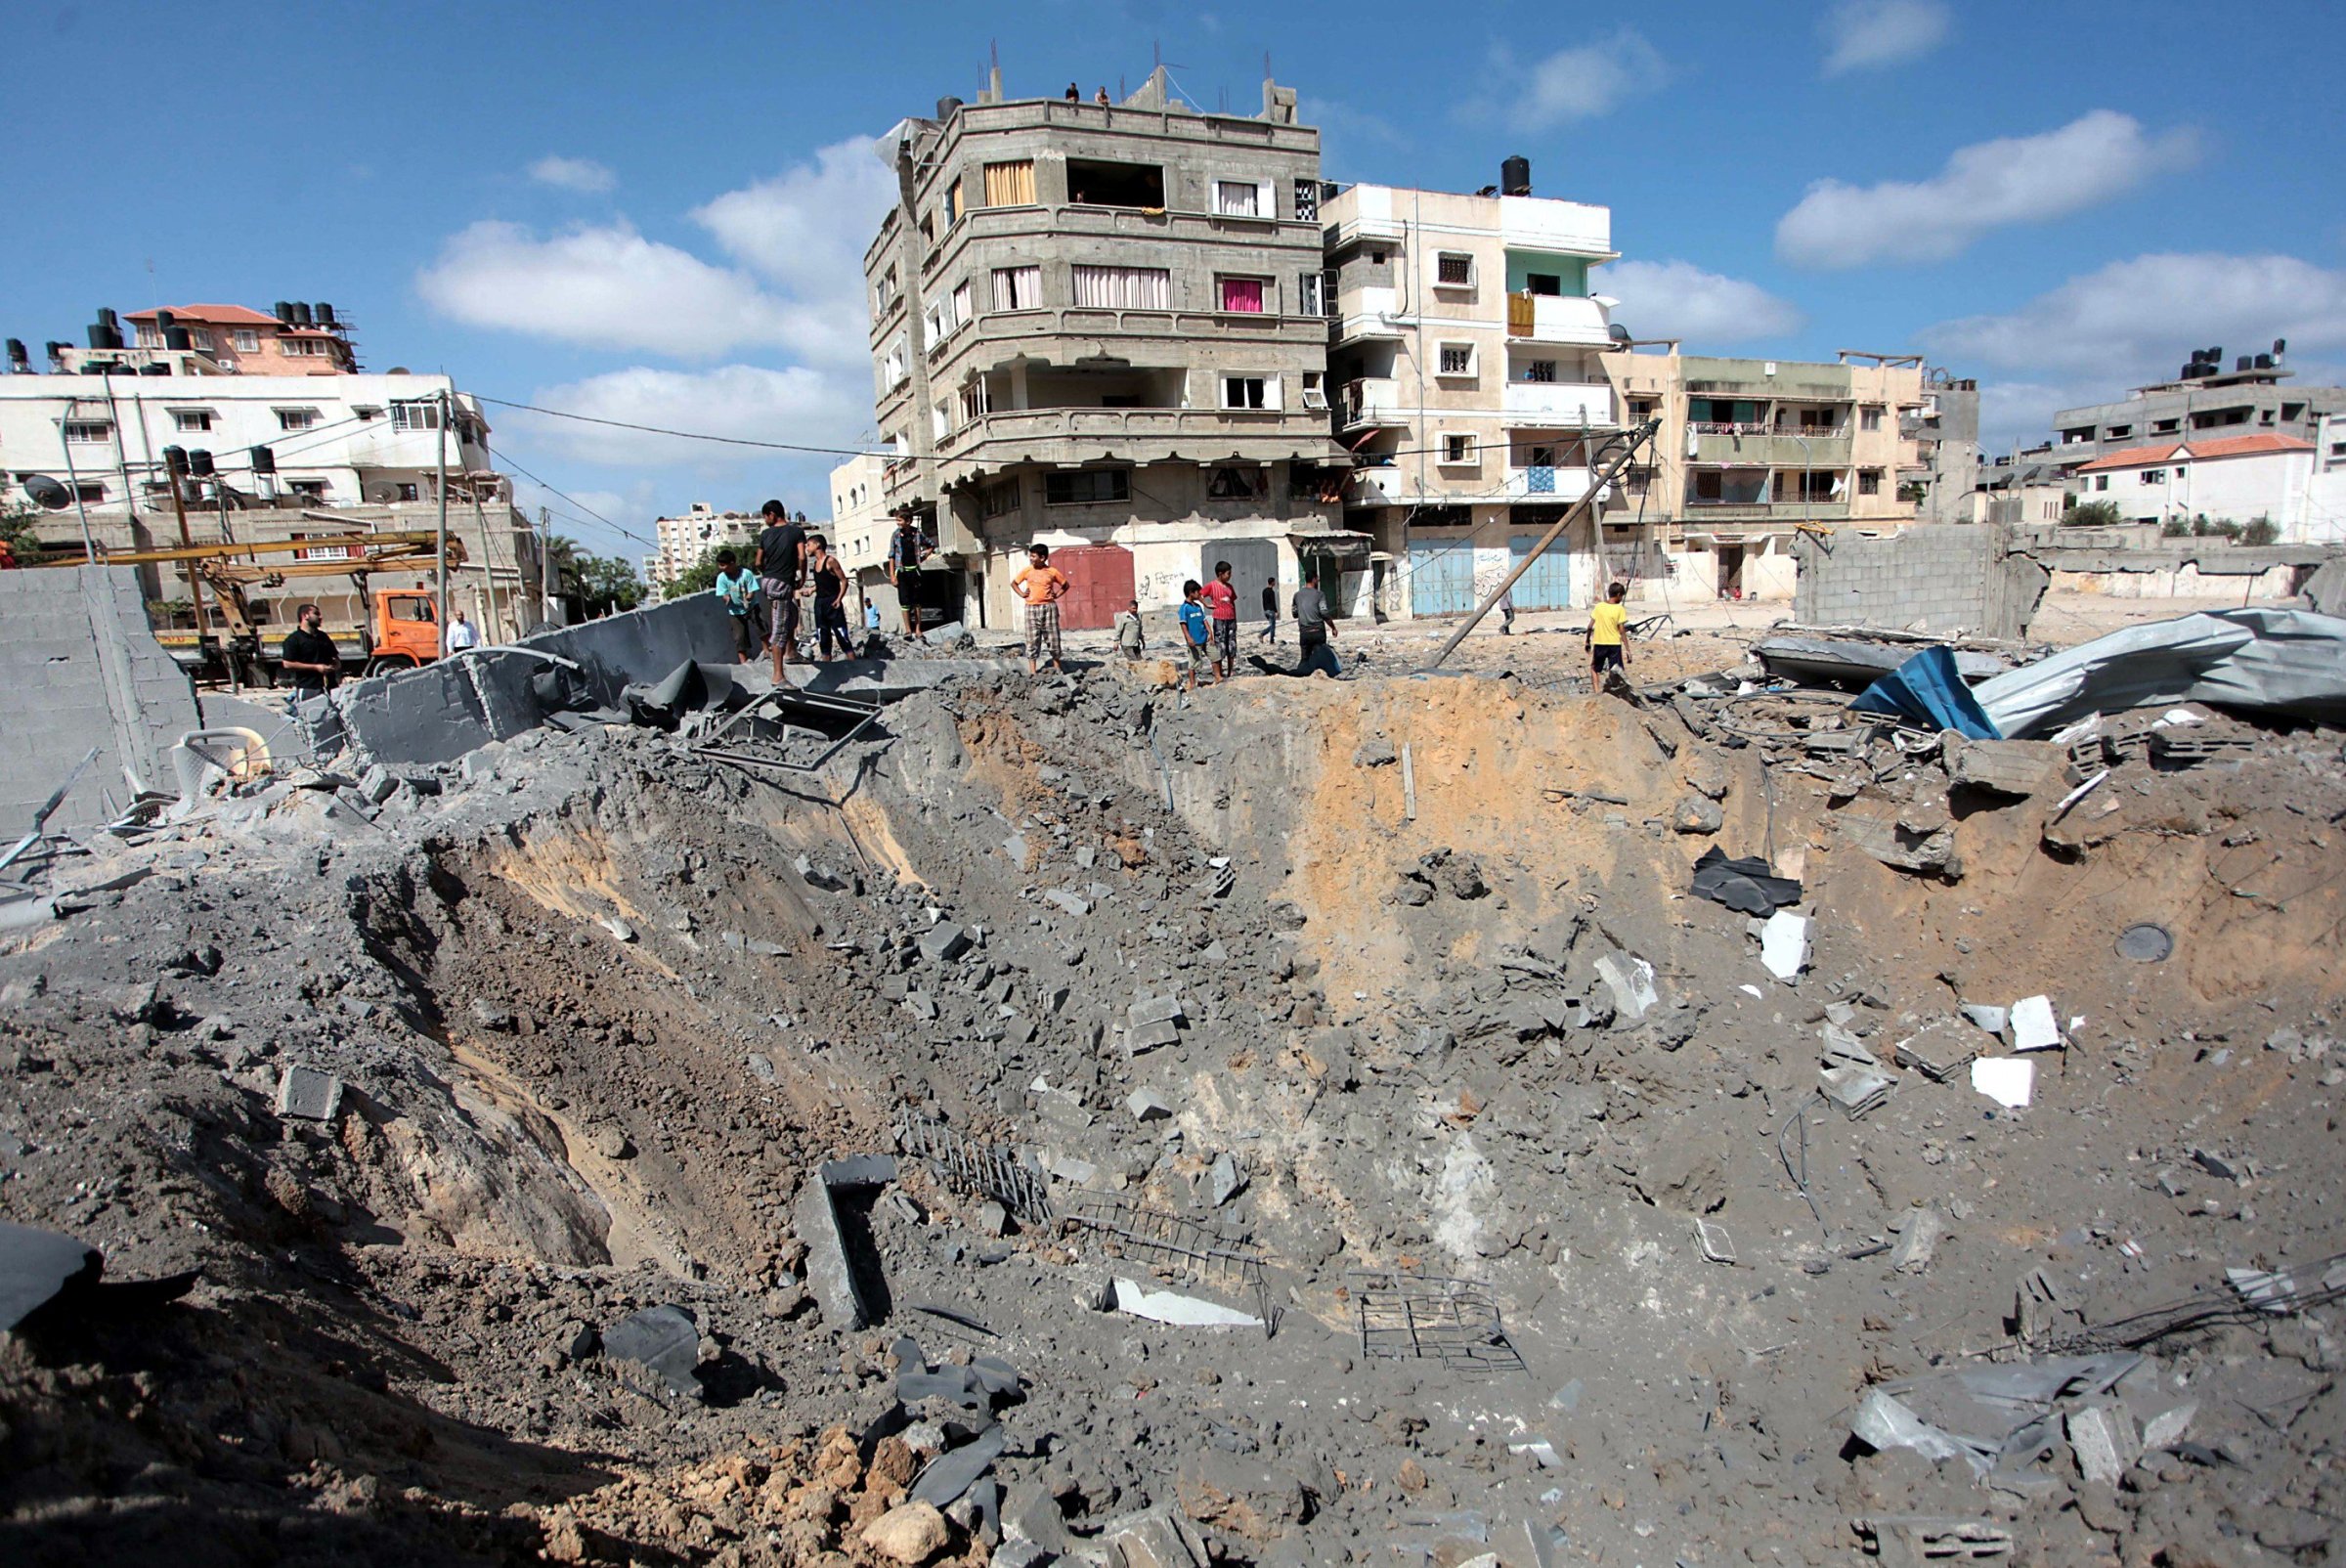 Palestinians inspect damaged areas following an overnight Israeli air strike, on July 3, 2014 in Gaza City, Gaza.